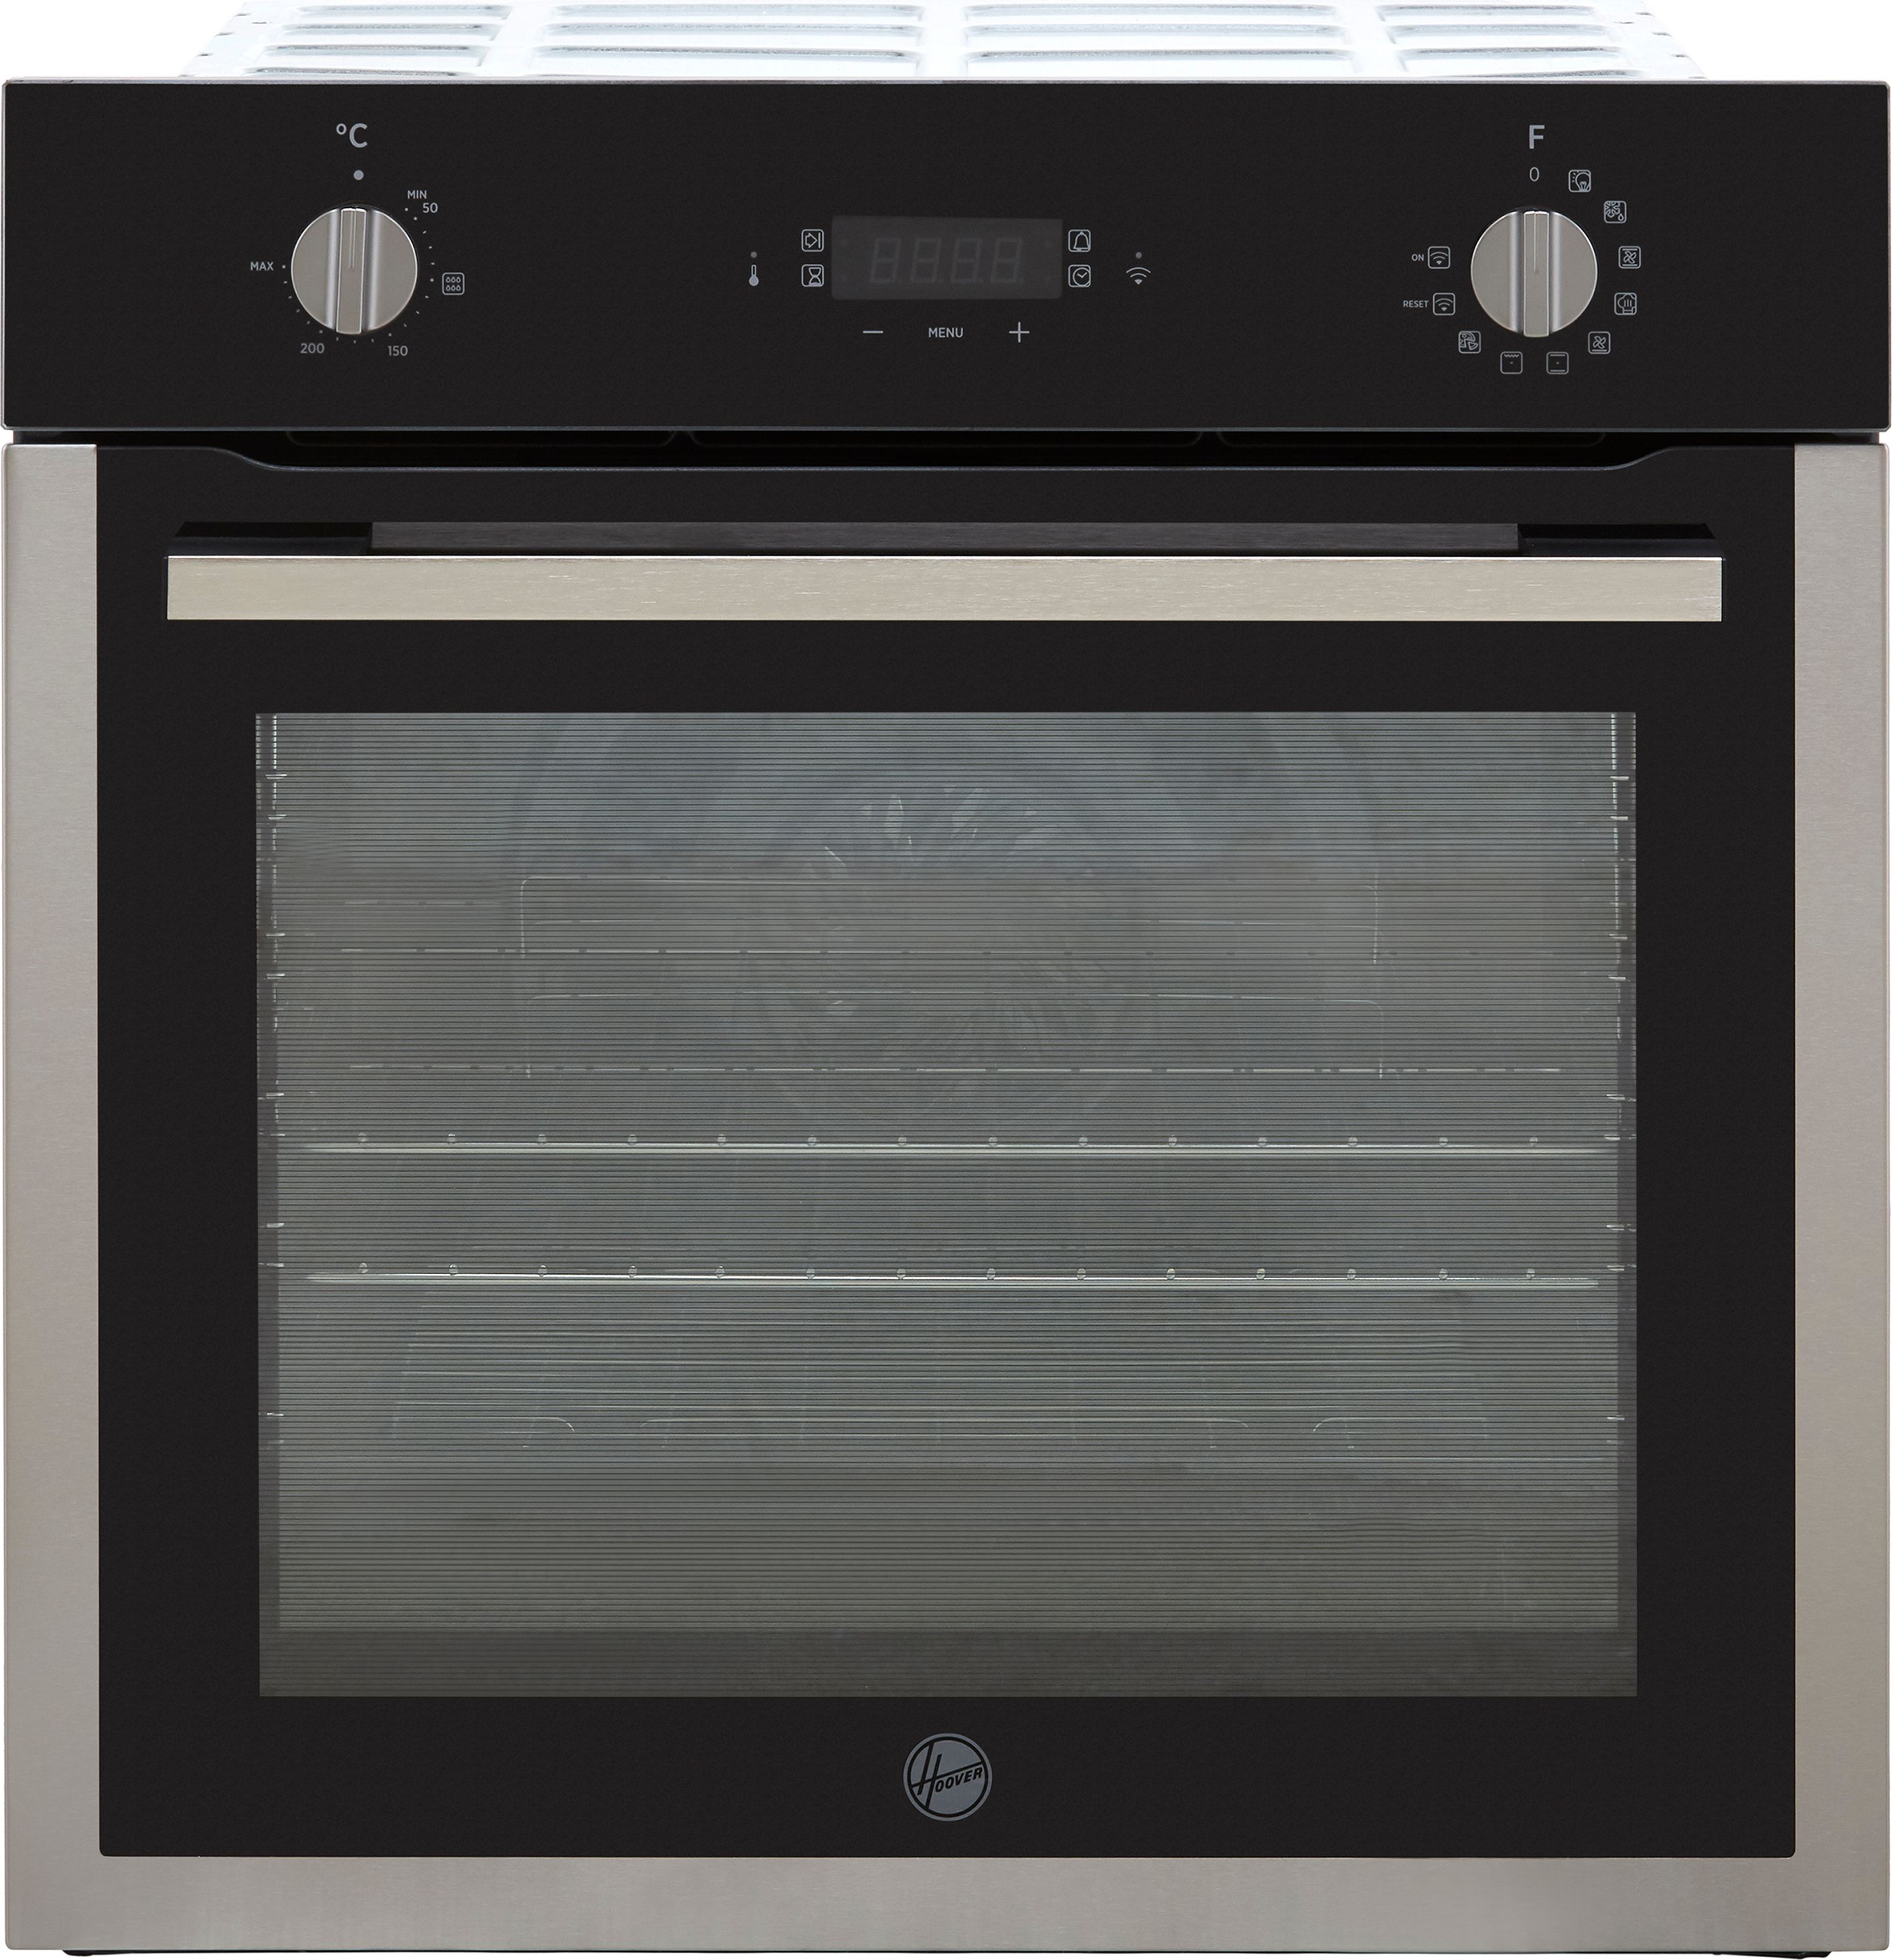 Hoover H-OVEN 300 HOC3UB3158BI WF Built In Electric Single Oven - Black / Stainless Steel - A+ Rated, Black